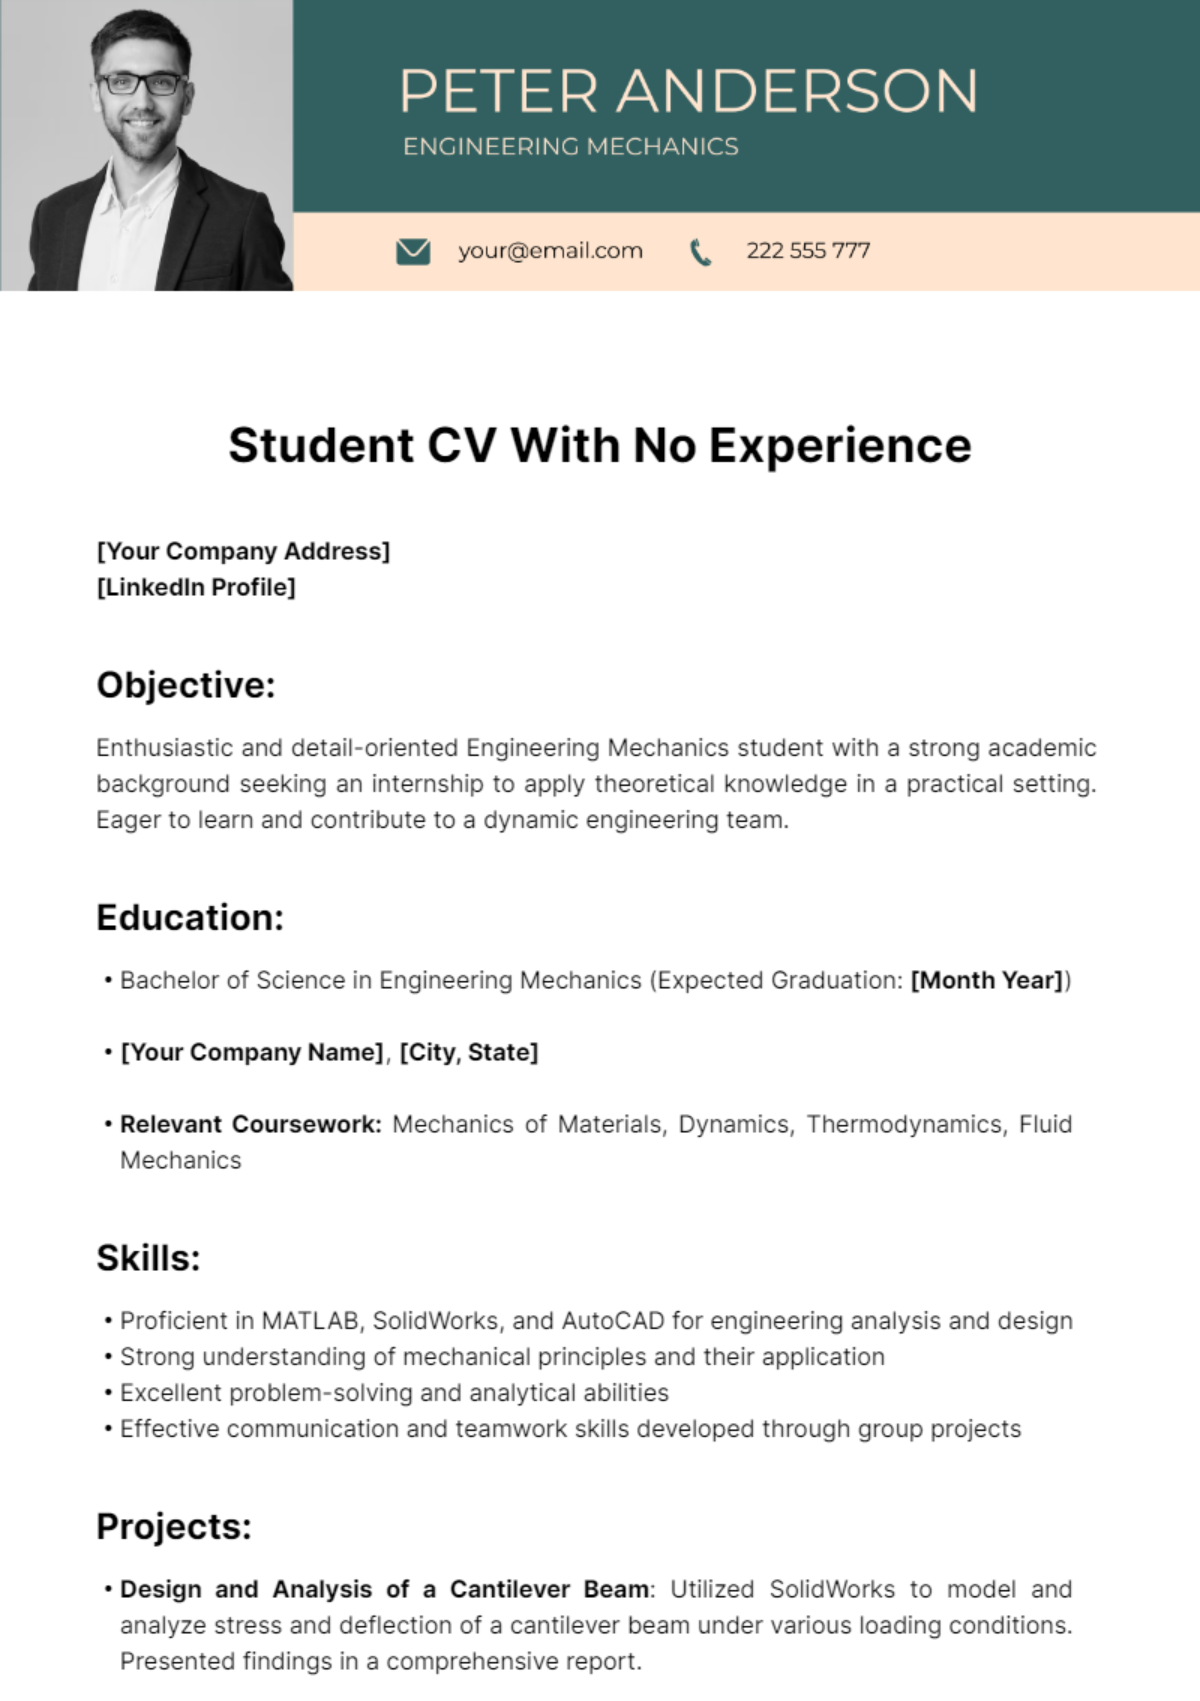 Student CV with No Experience Template